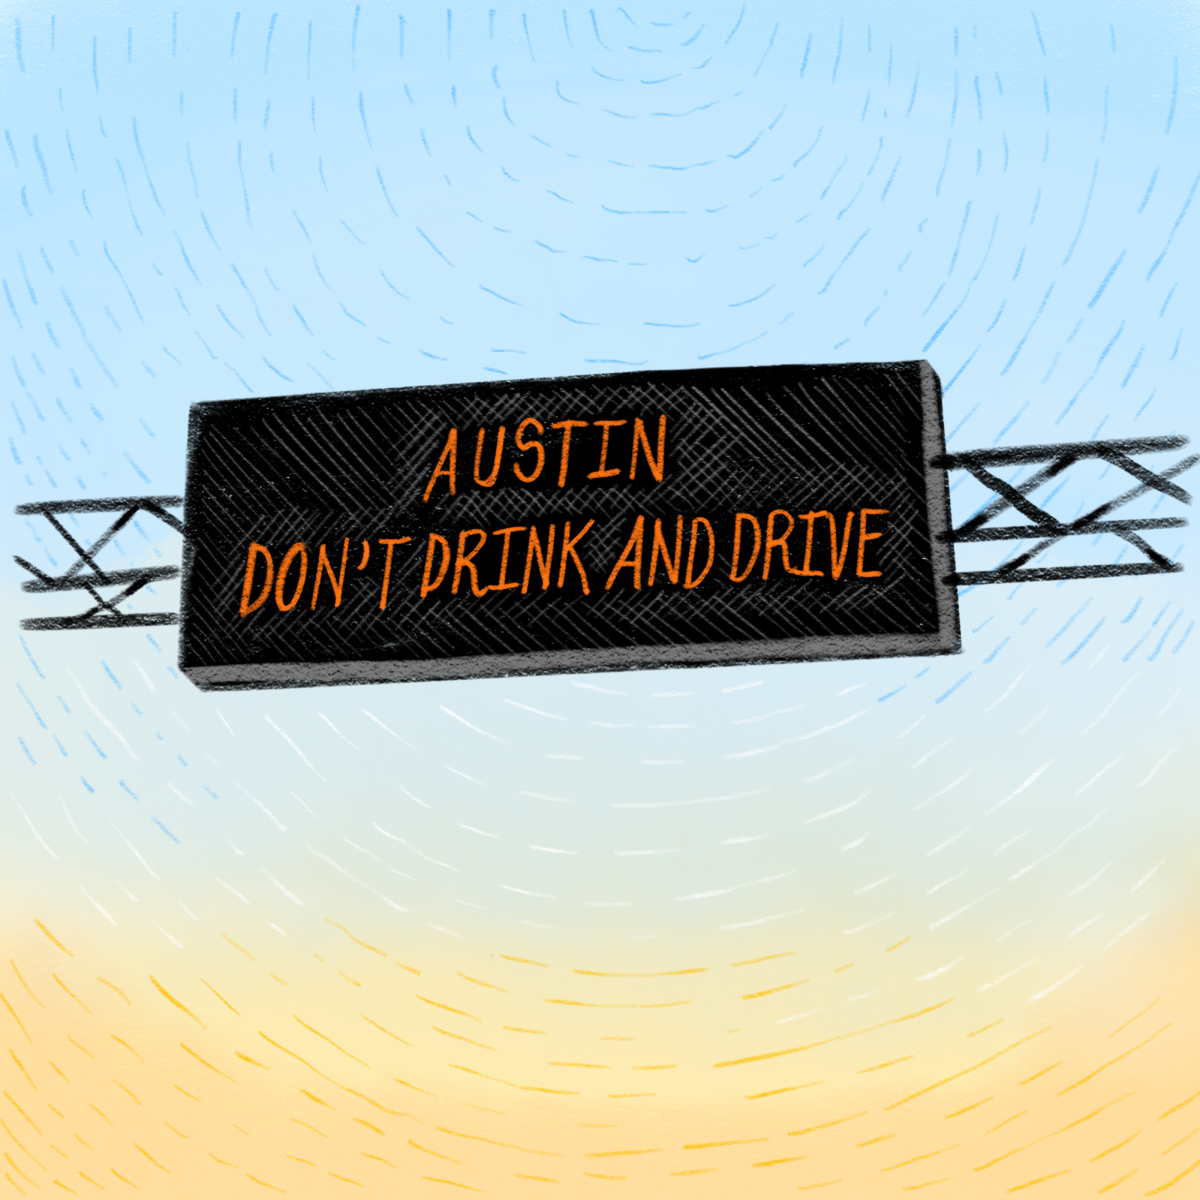 Austin+Police+implement+summer-long+%E2%80%98no+refusal%E2%80%99+initiative+to+better+enforce+DWI+laws